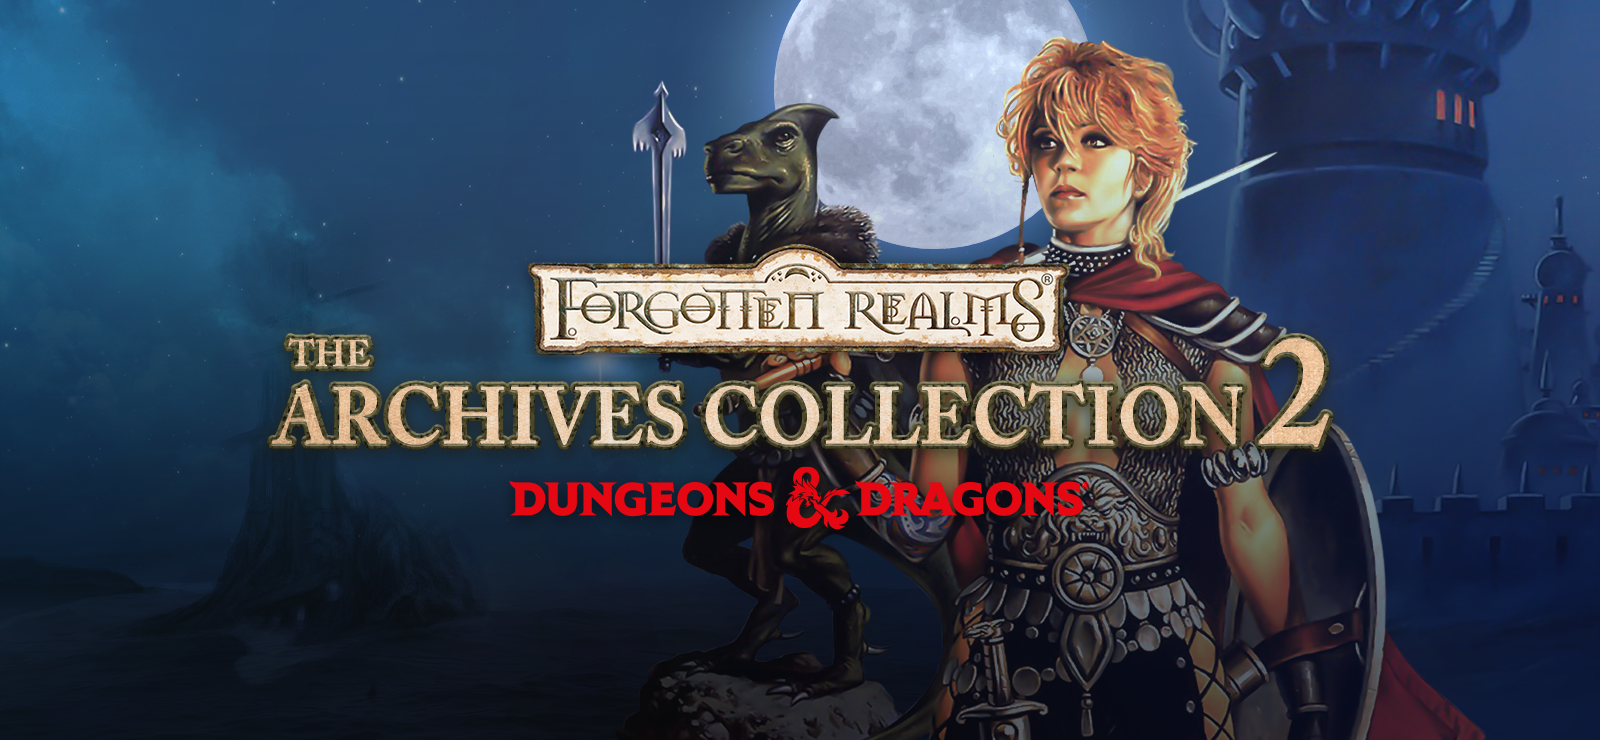 Forgotten Realms: The Archives - Collection Two